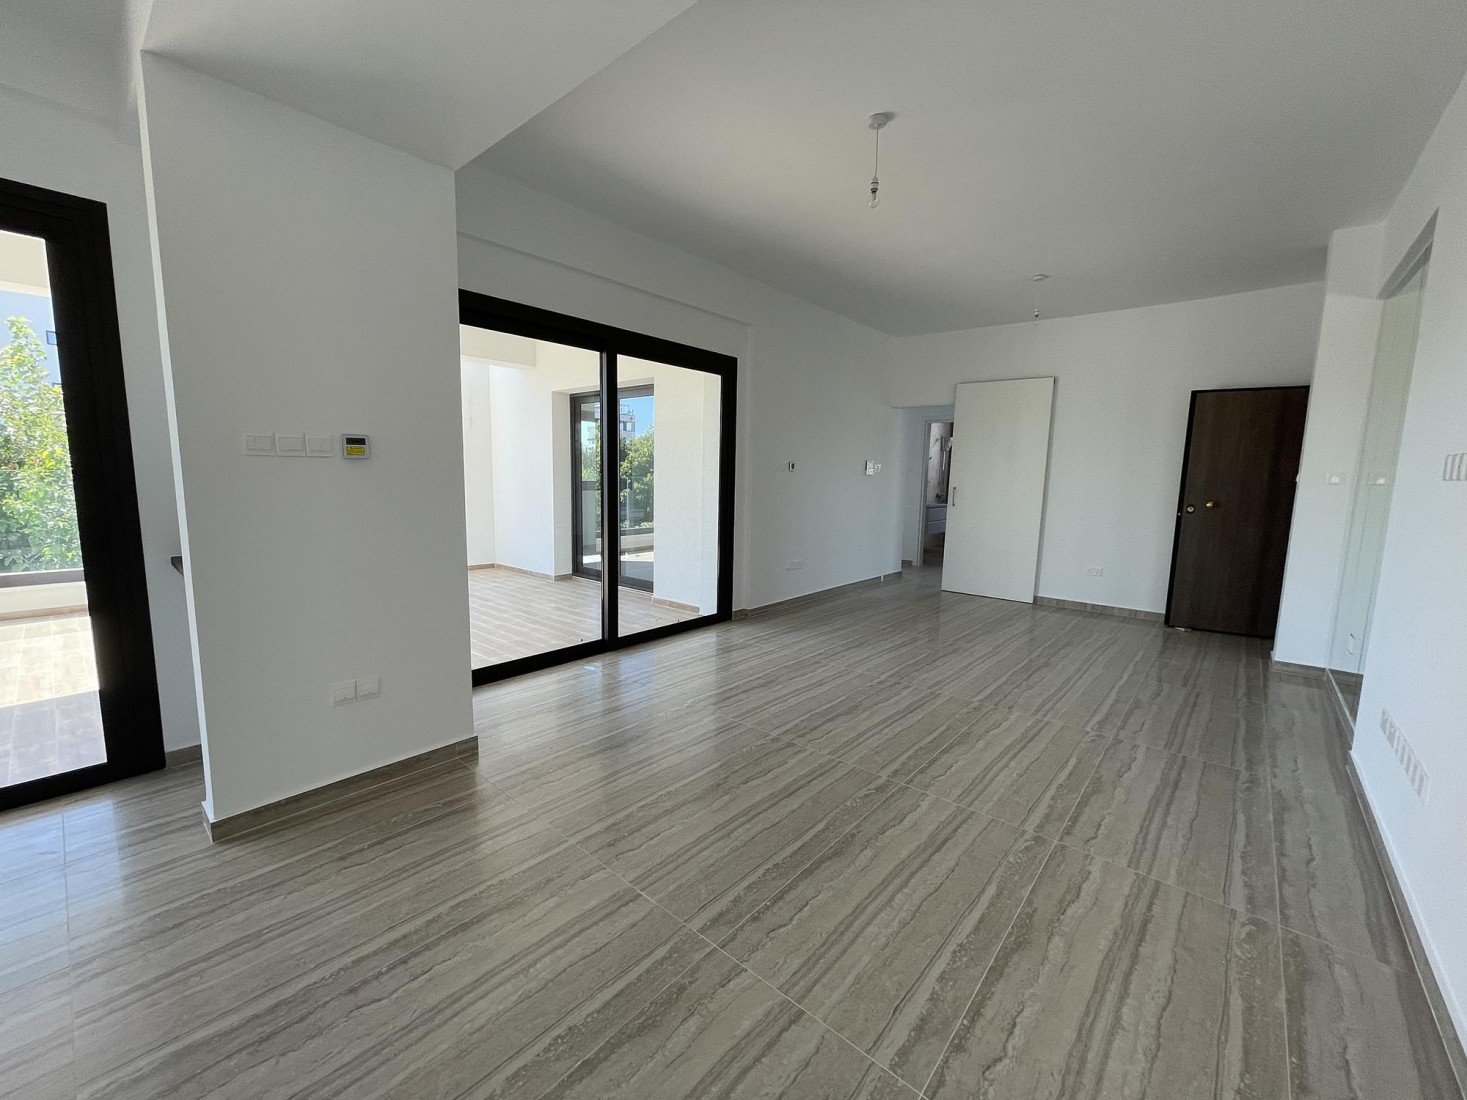 Apartment for sale in Limassol, Cyprus 3815877920